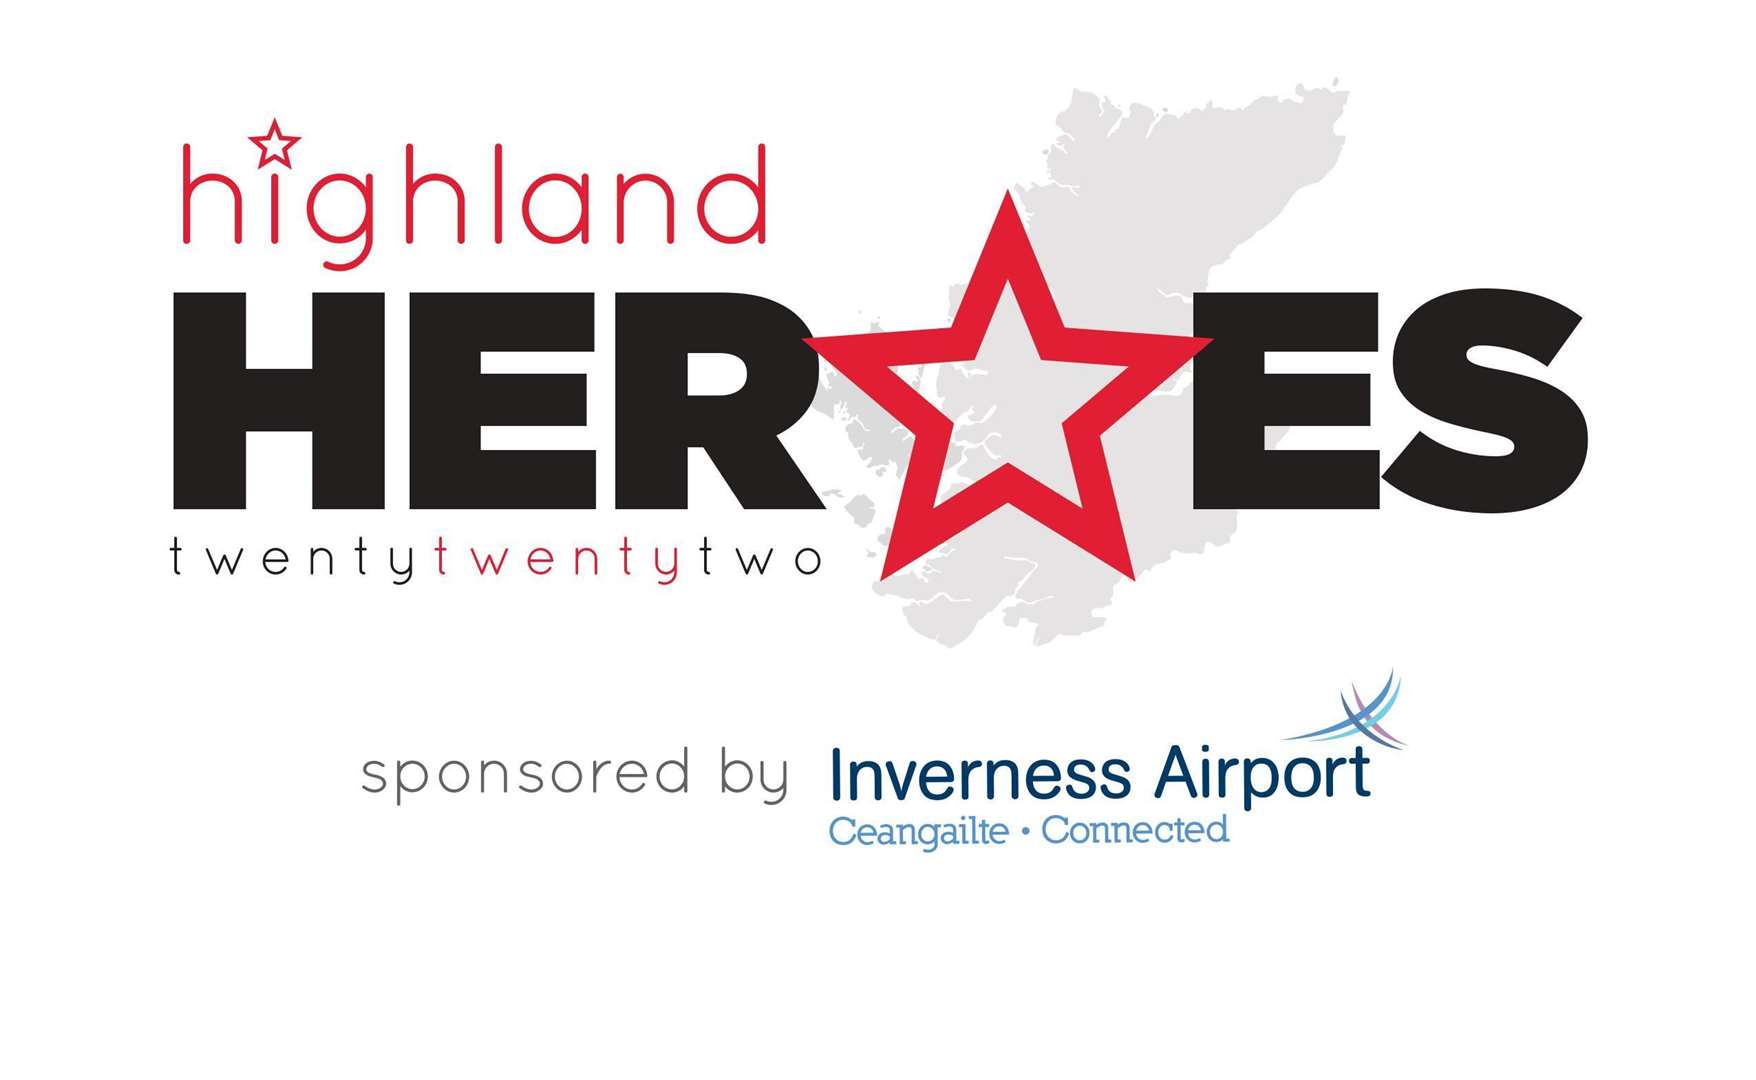 Highland Heroes 2022 is launched!